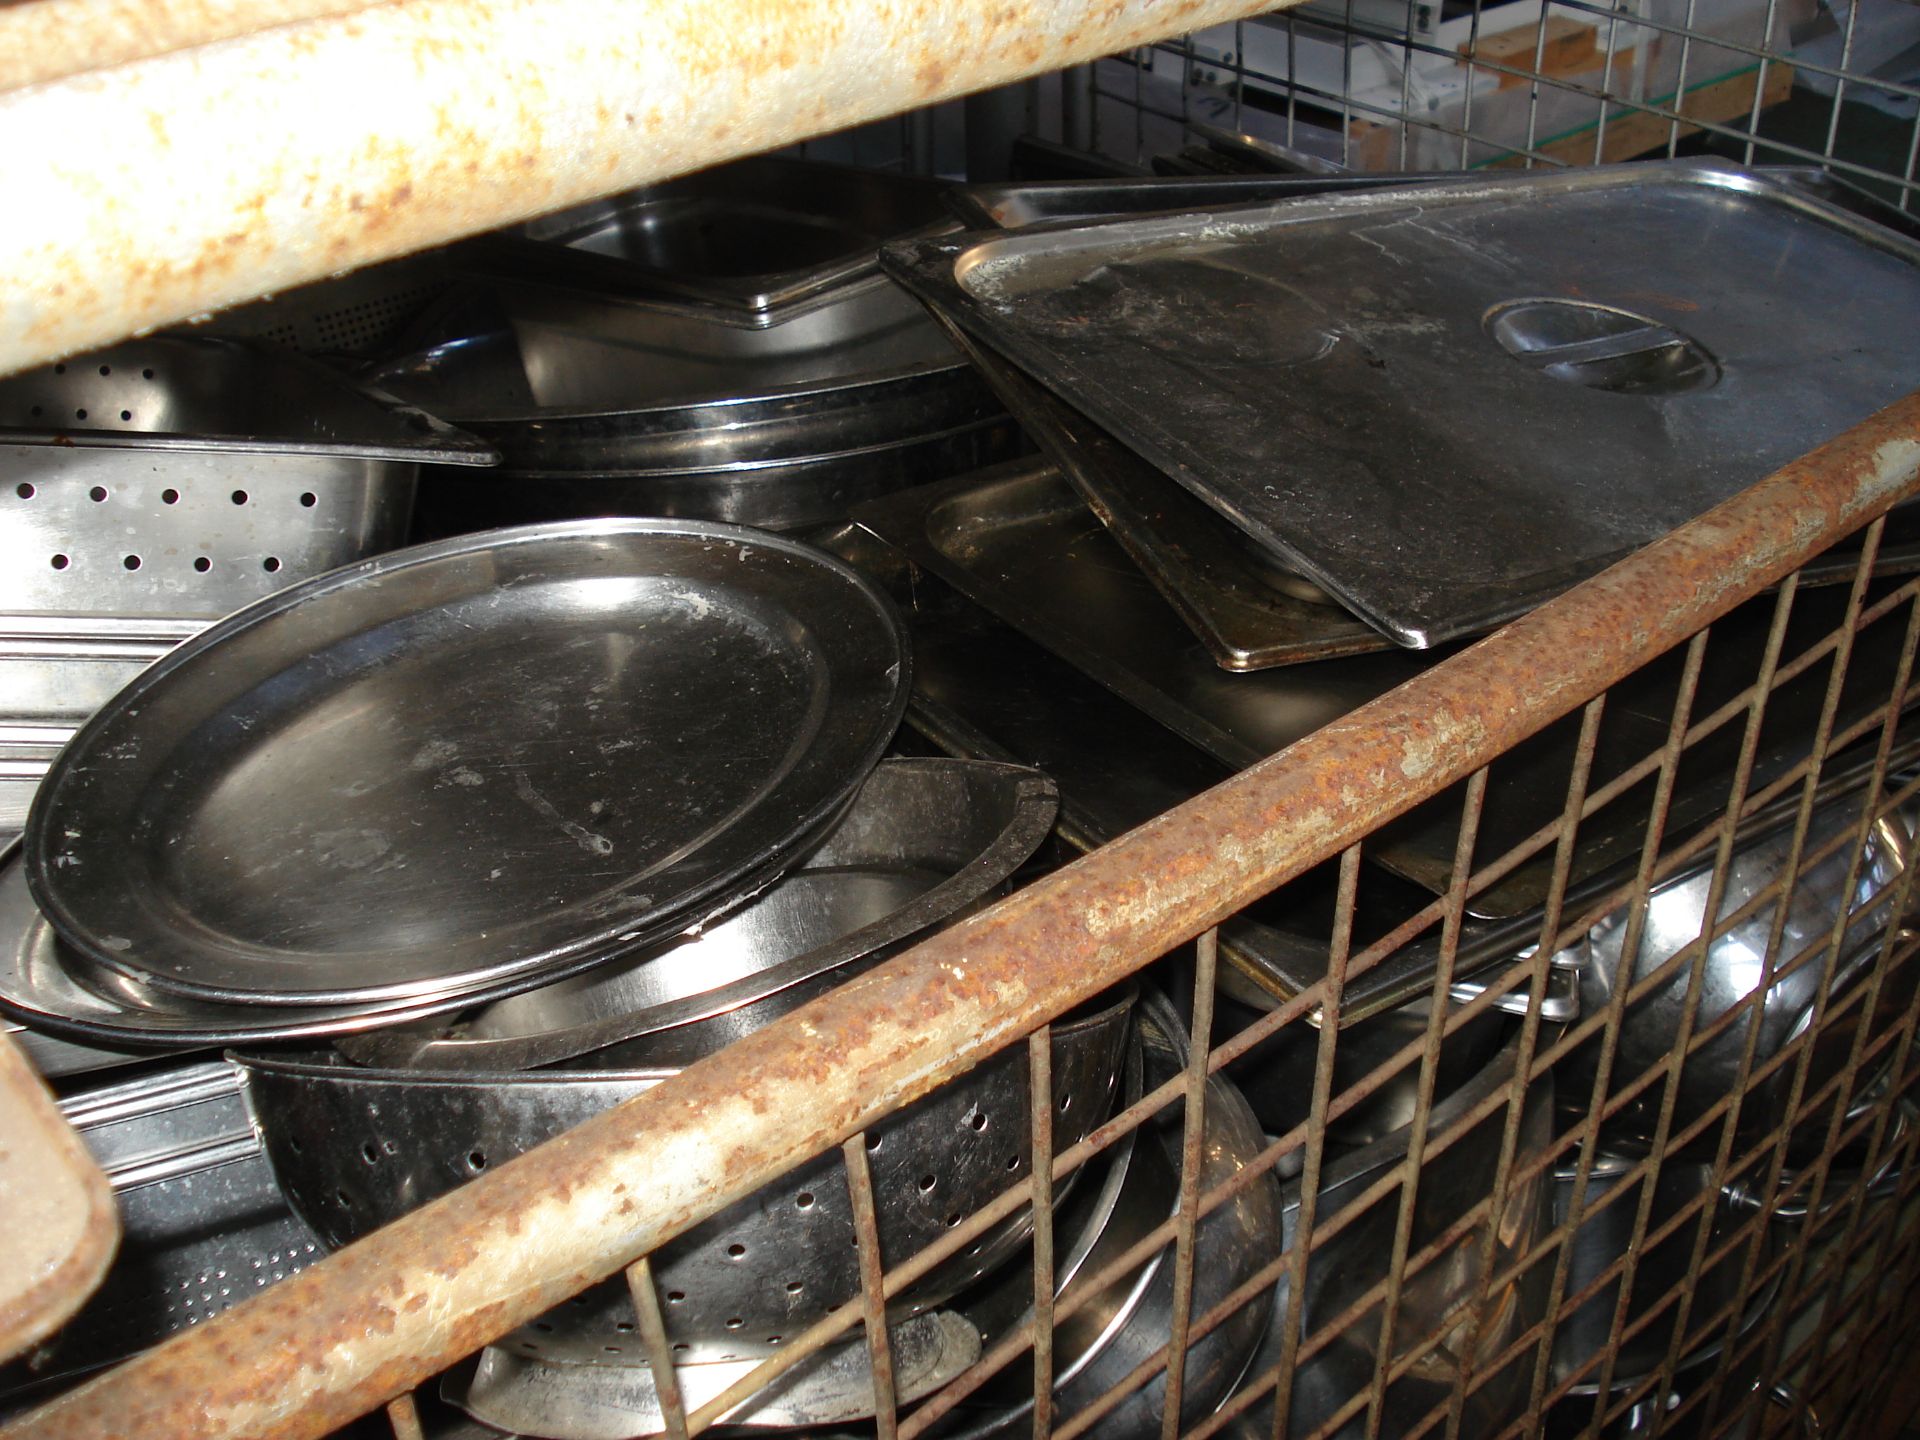 MIXED COMMERCIAL GRADE COOKING TRAYS/SAUCEPANS AND BAIN MARIE POTS - MIXED CONDITION - STORAGE MEDIA - Image 2 of 4